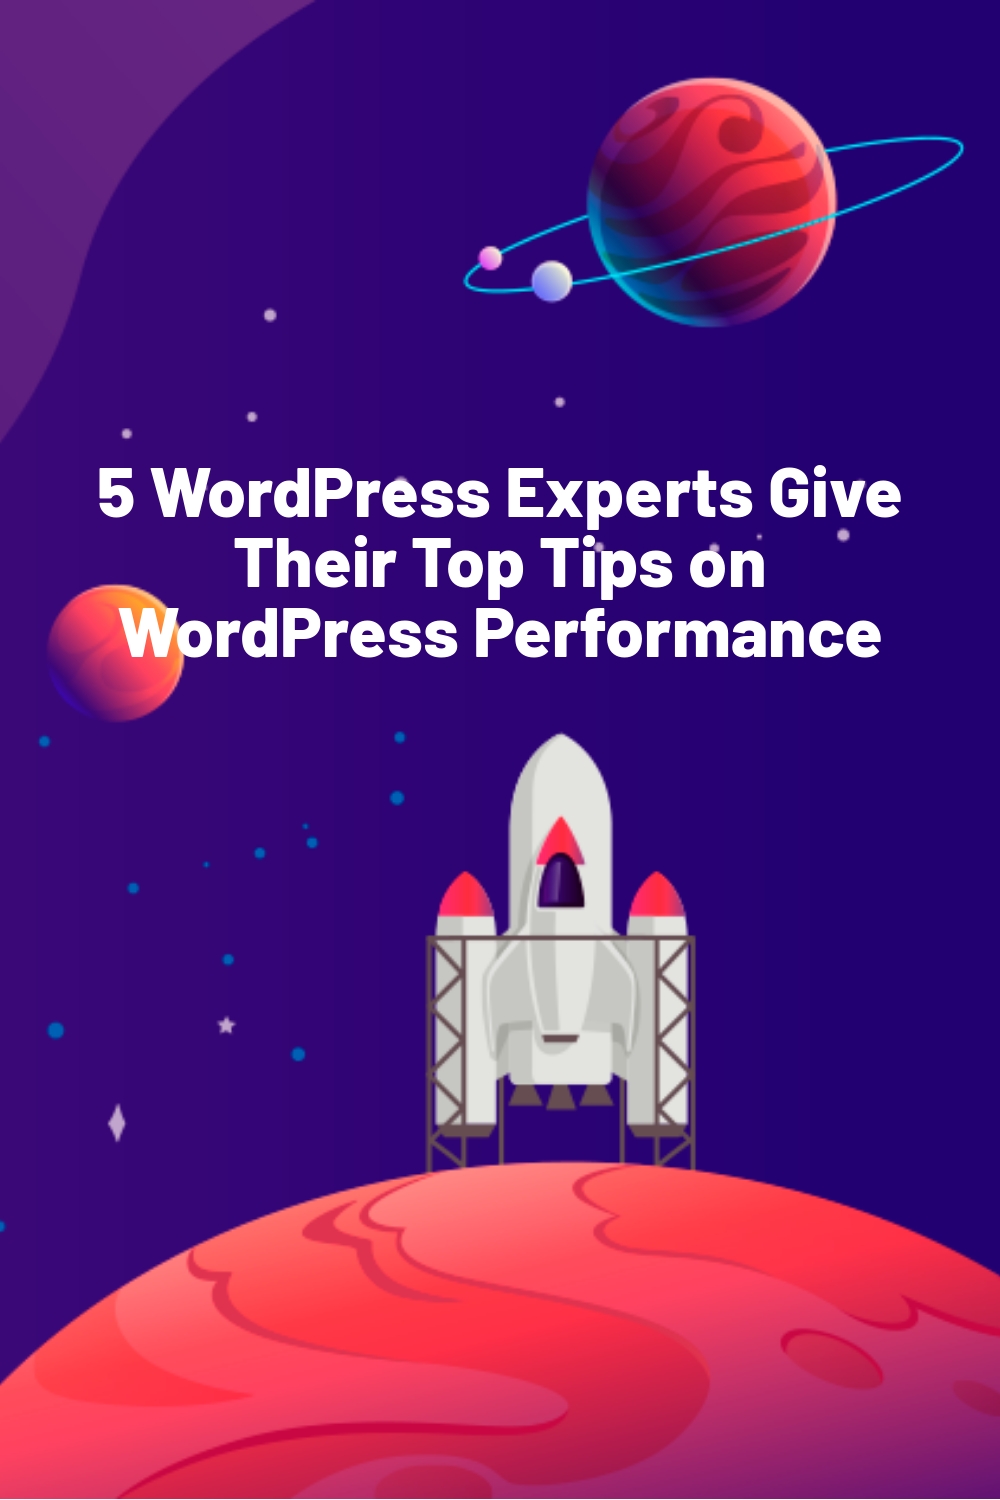 5 WordPress Experts Give Their Top Tips on WordPress Performance